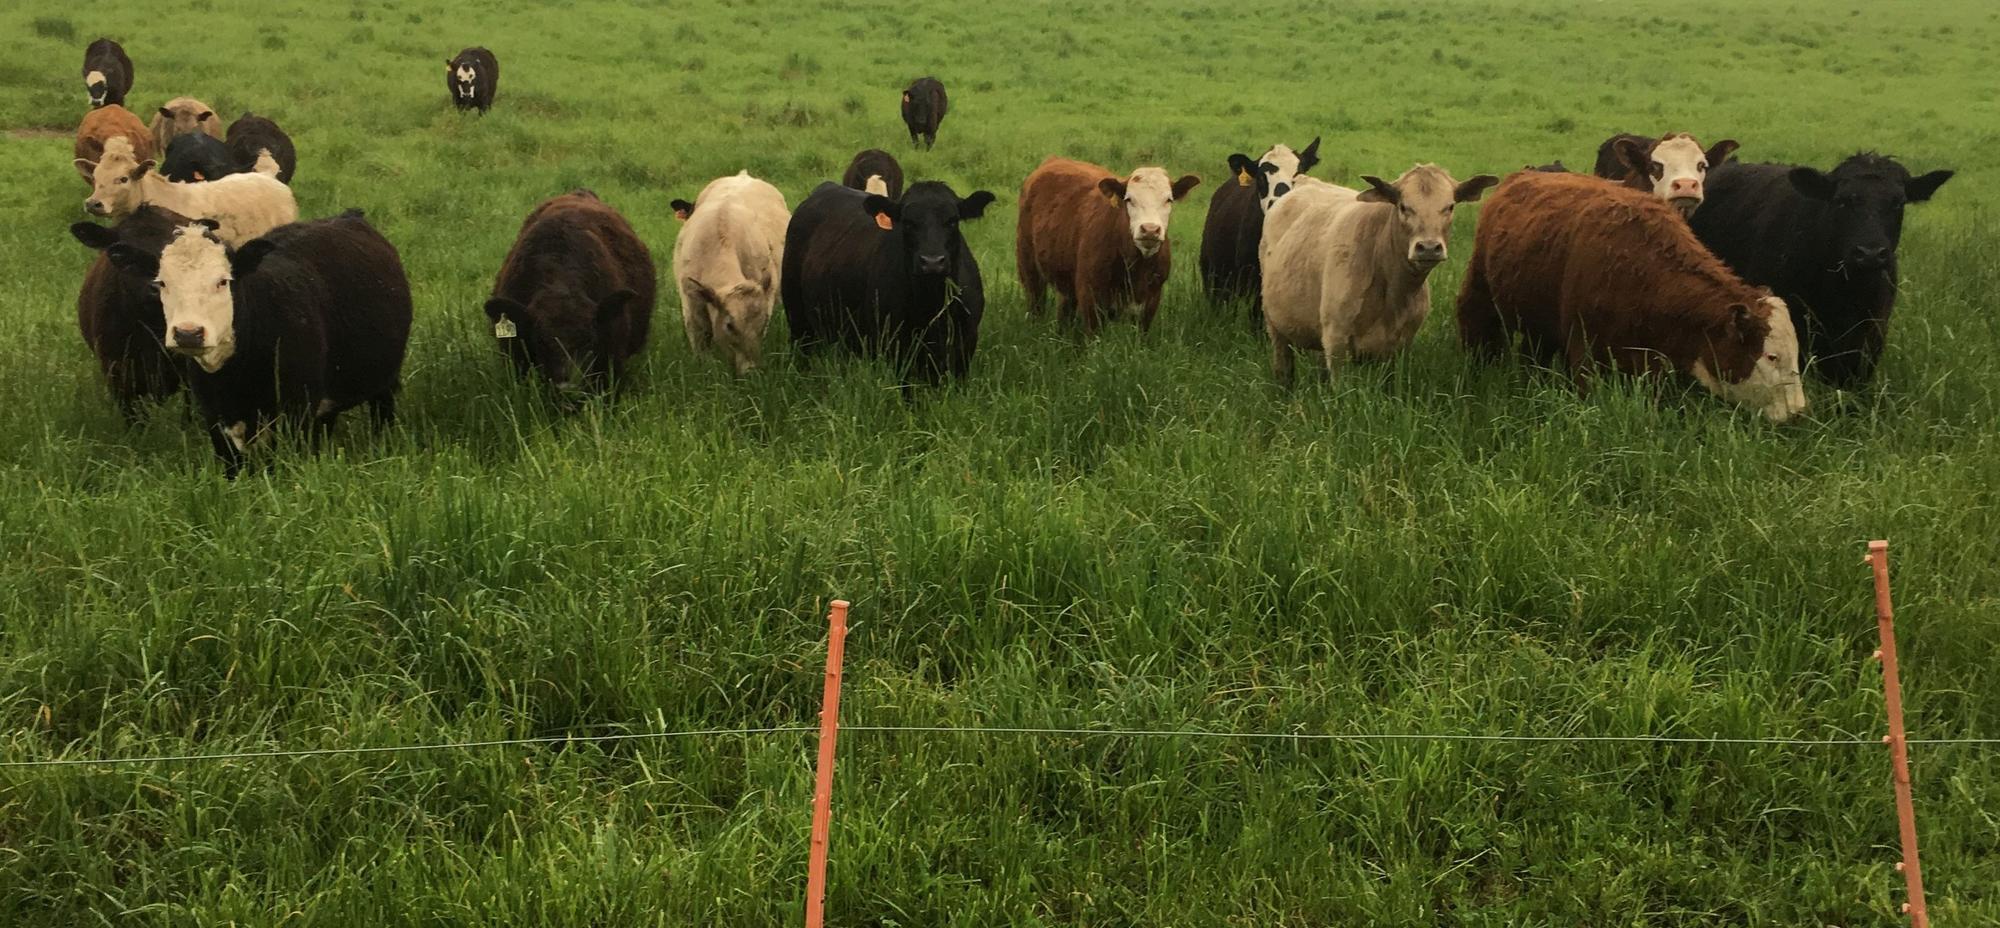 A group of more than a dozen cattle stands in a verdant pasture.